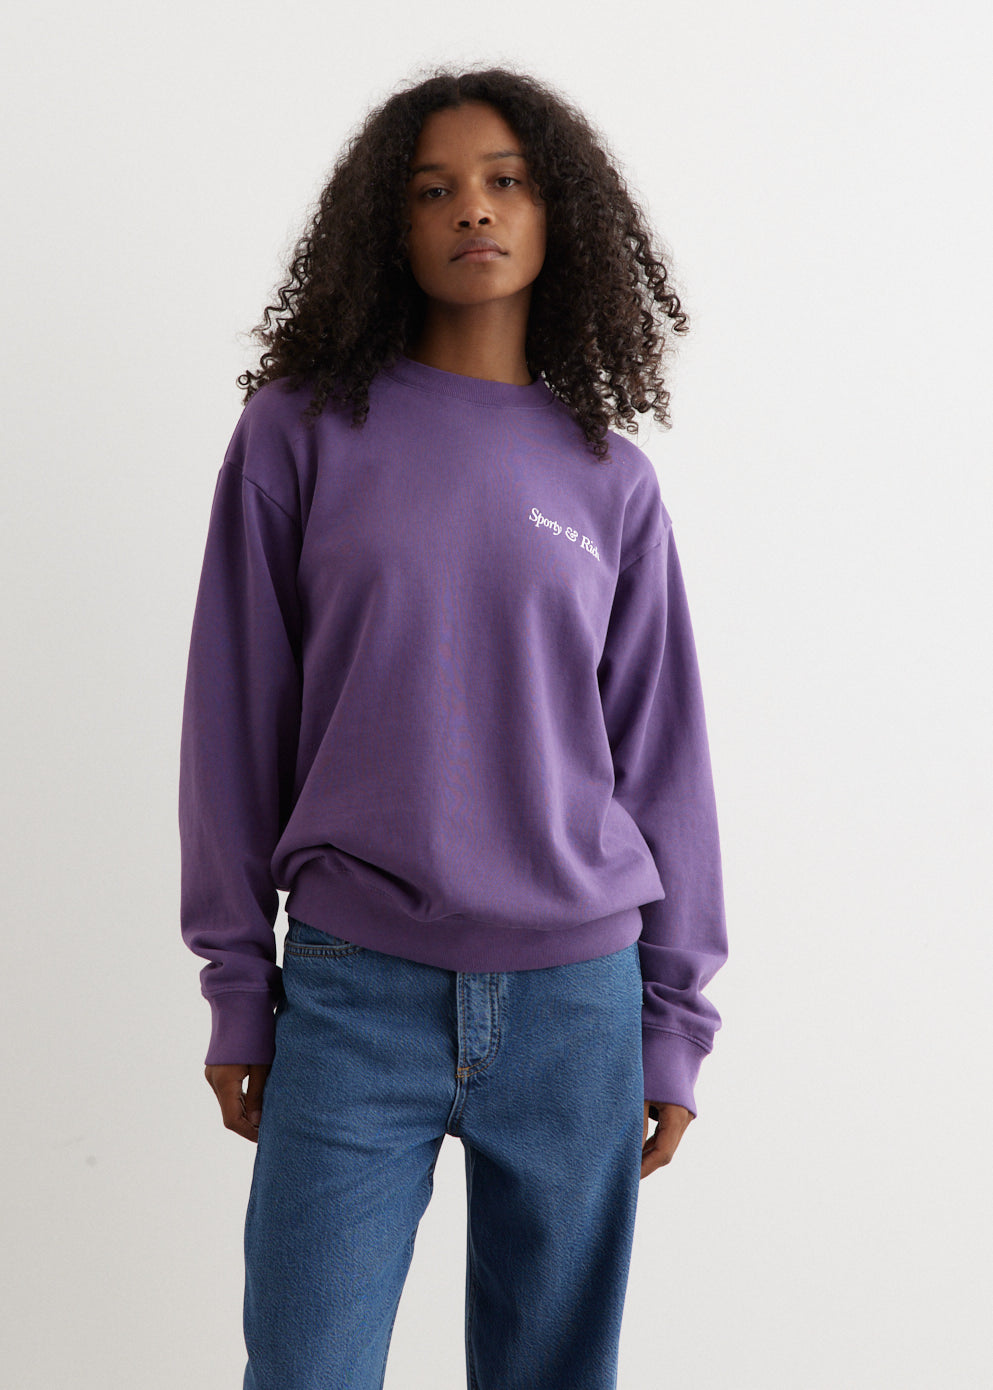 Women's Hoodie With Hwcny Print by Sporty Rich